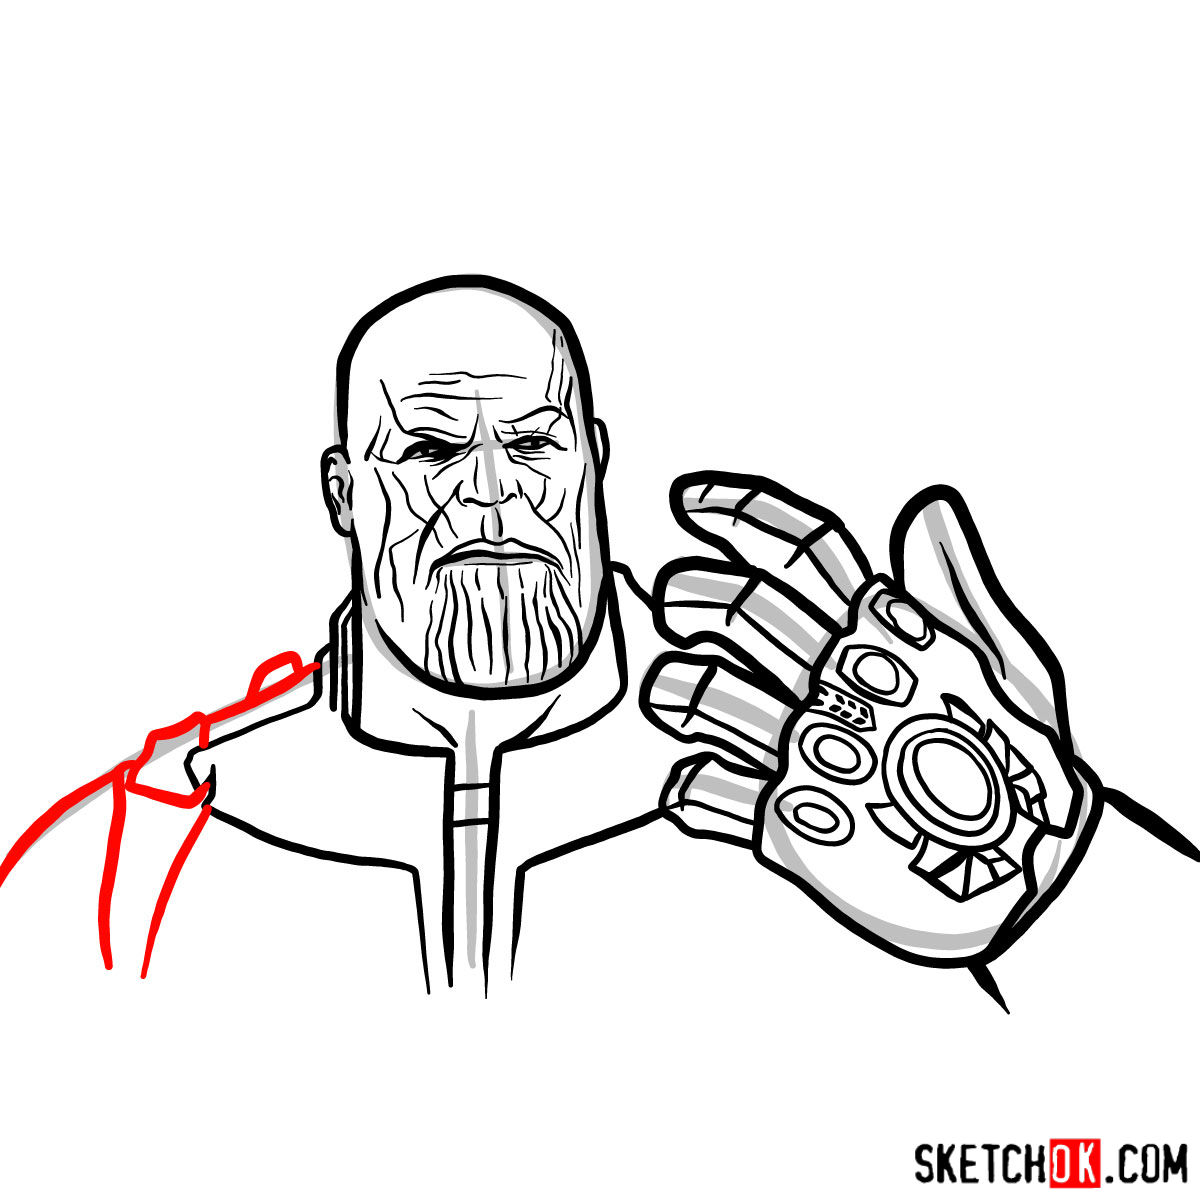 How to draw Thanos from the Avengers: Infinity War 2018 film - step 14